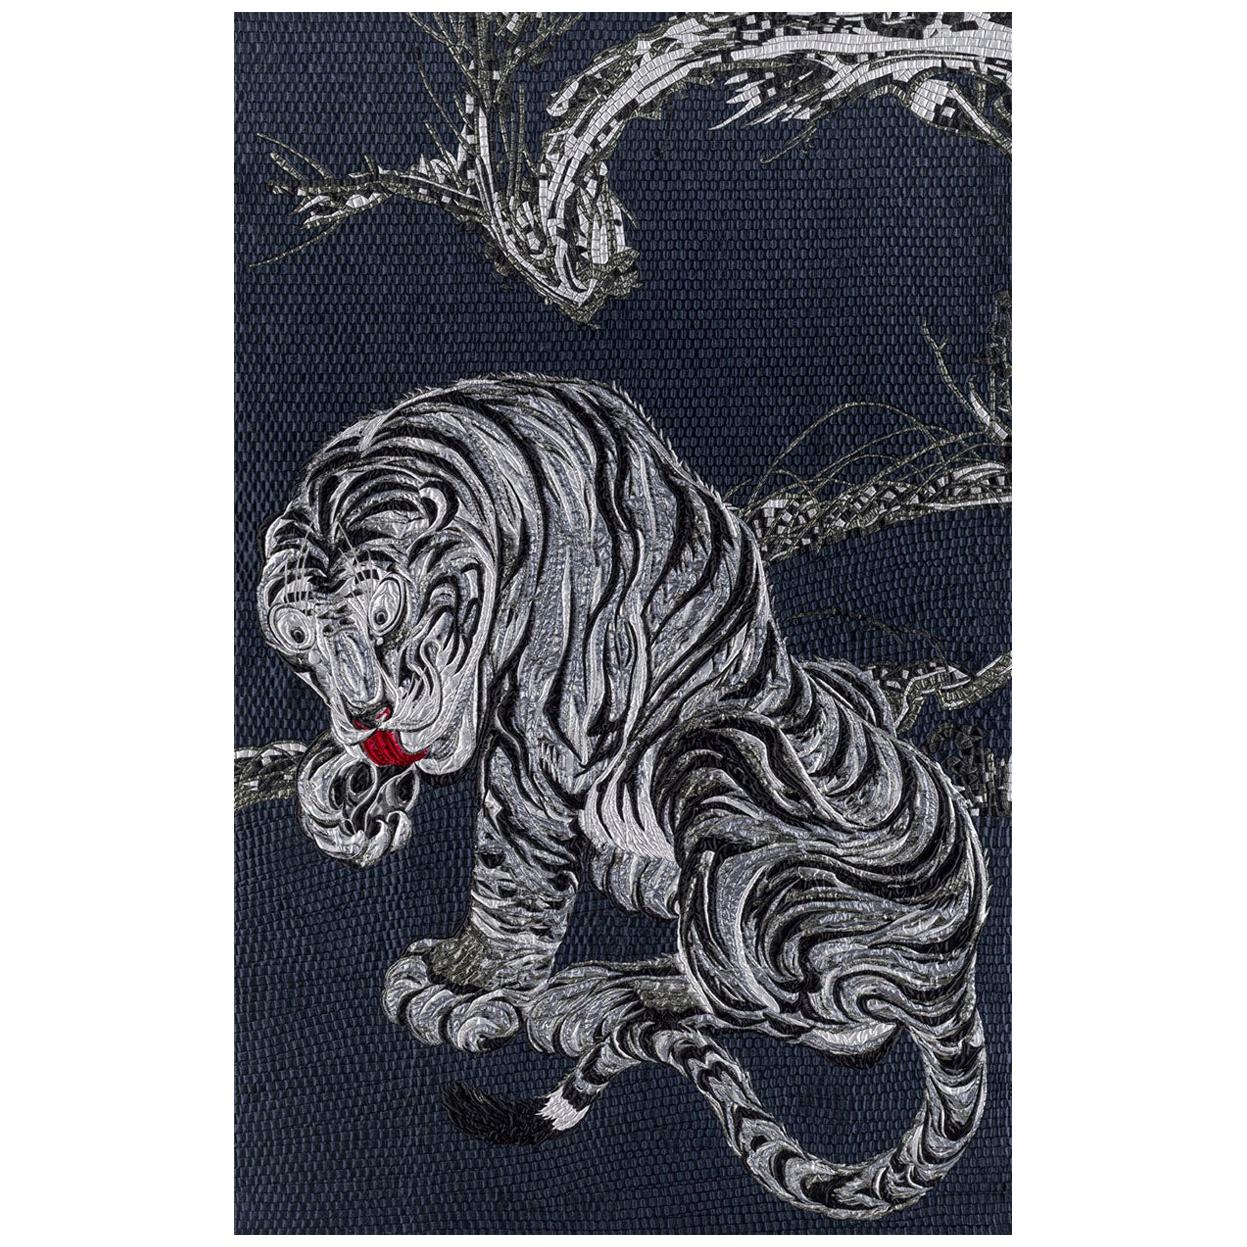  Fabric Tapestry with Tiger Design Upholstered Panel on Demand